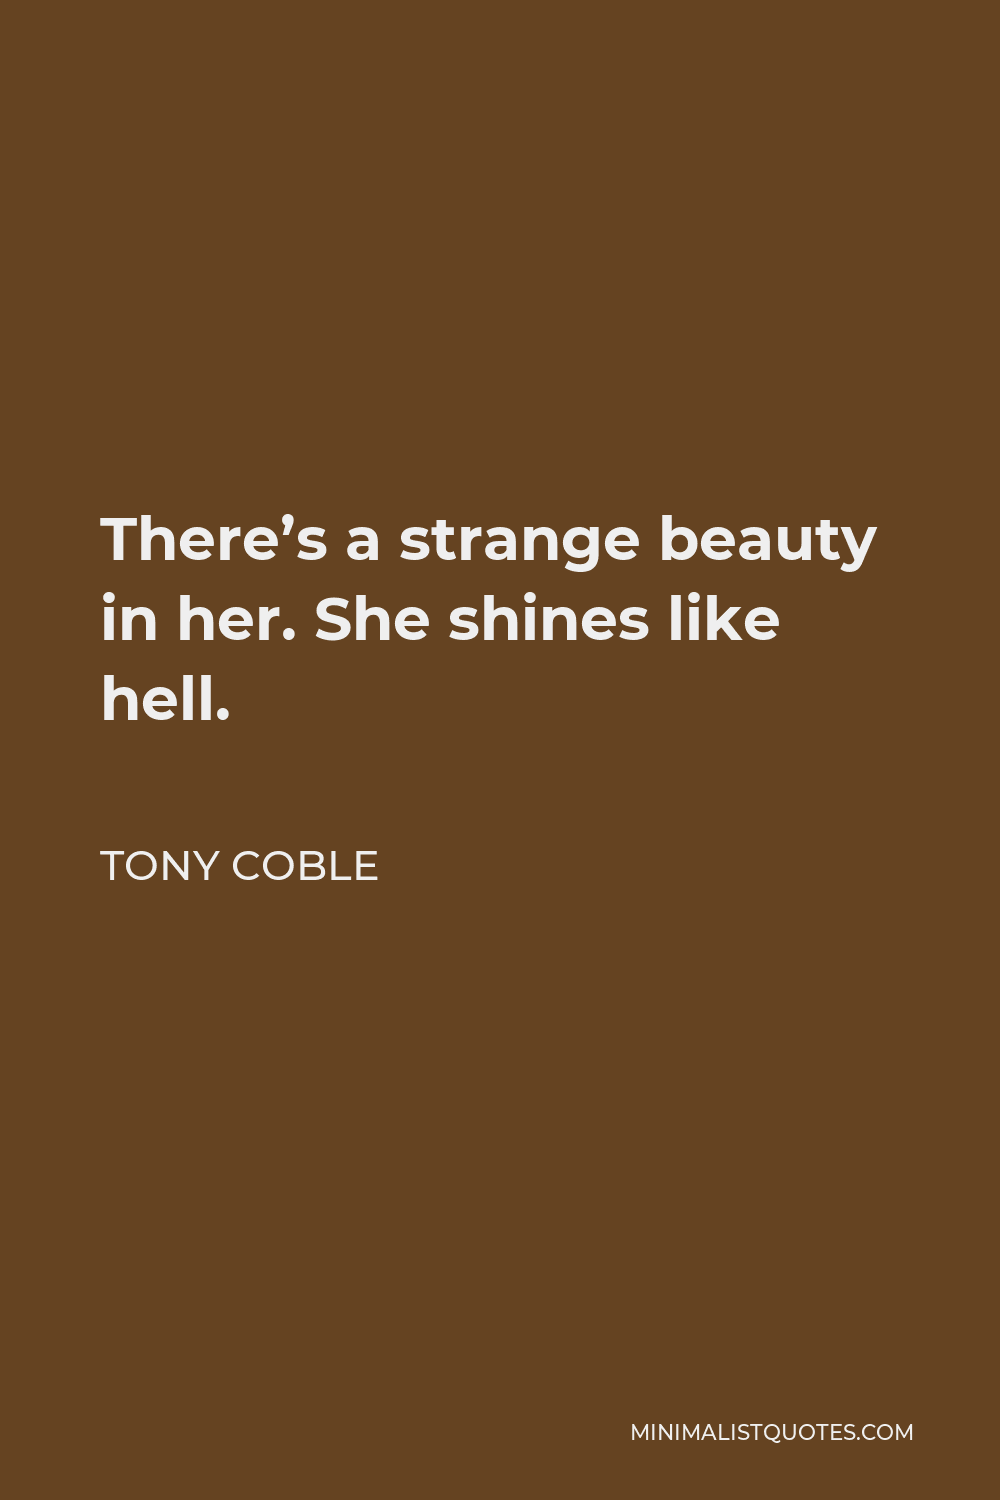 Tony Coble Quote - There’s a strange beauty in her. She shines like hell.